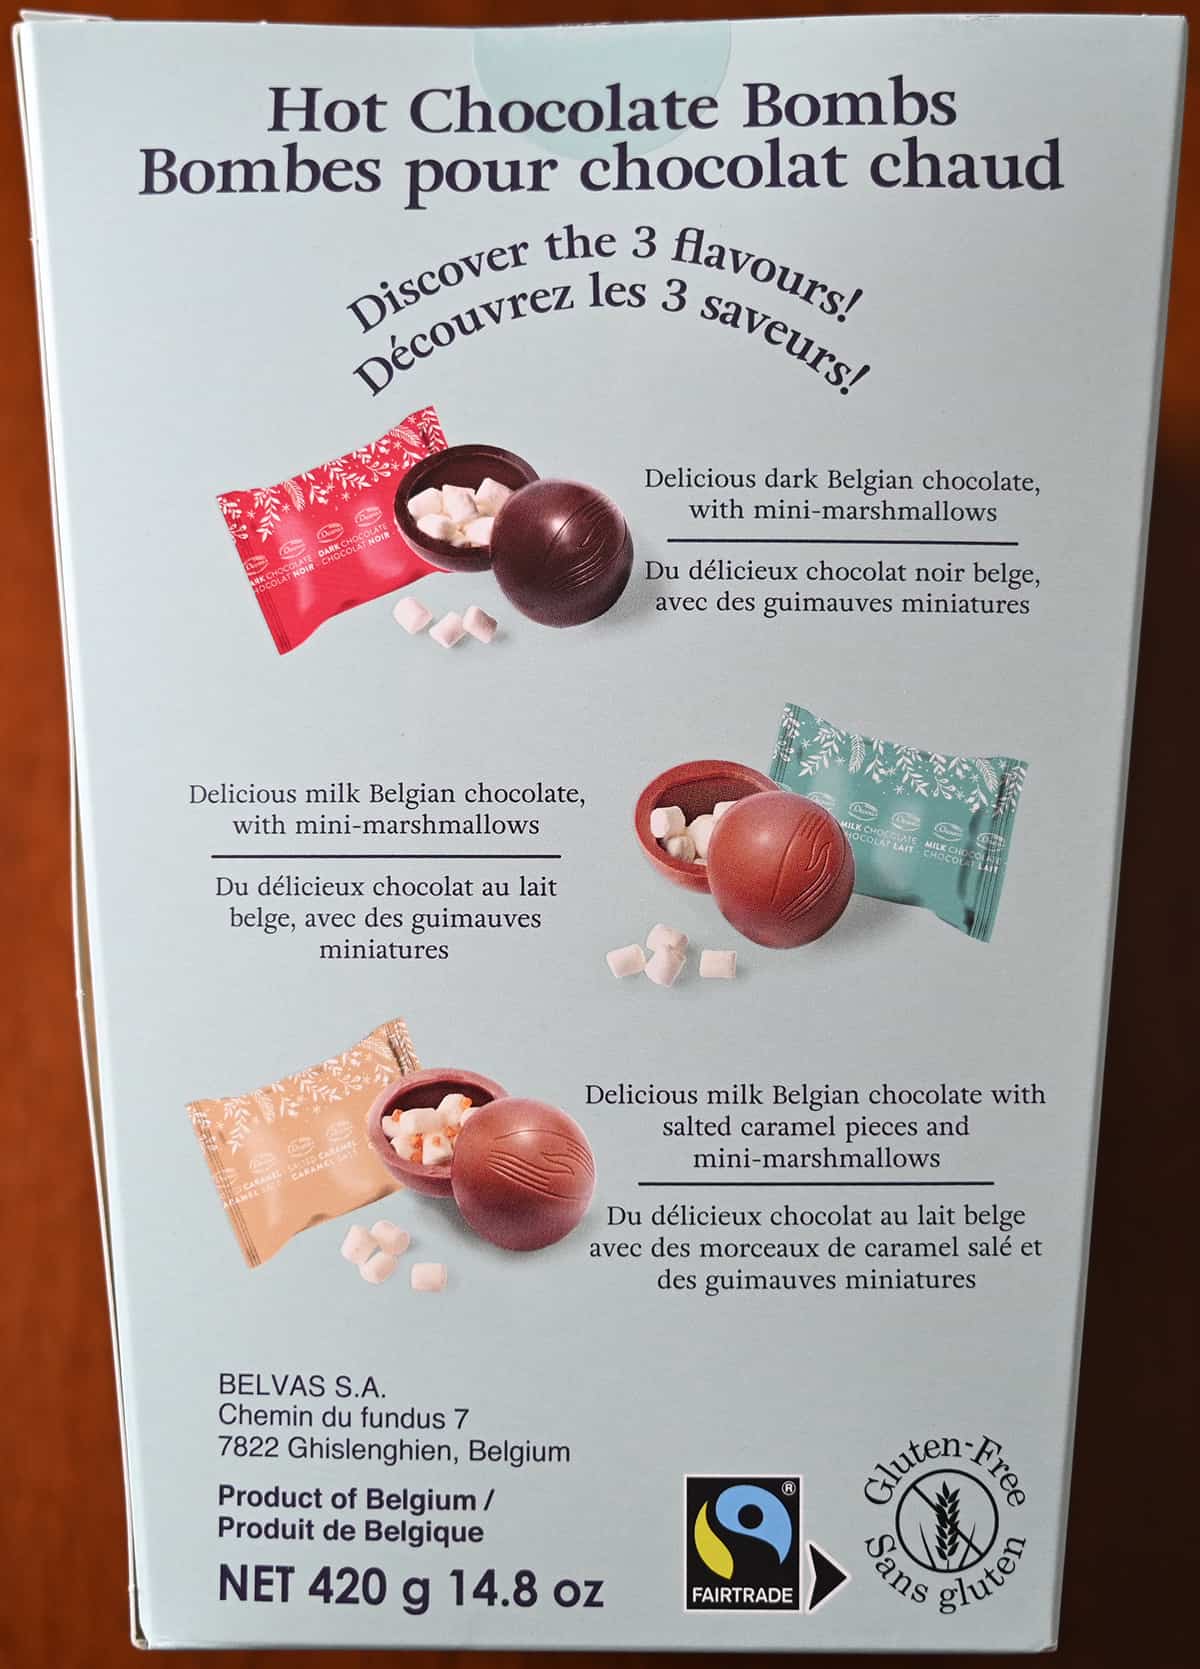 Image of the back of the hot chocolate bomb box showing the three kinds and that they're made in Belgium.